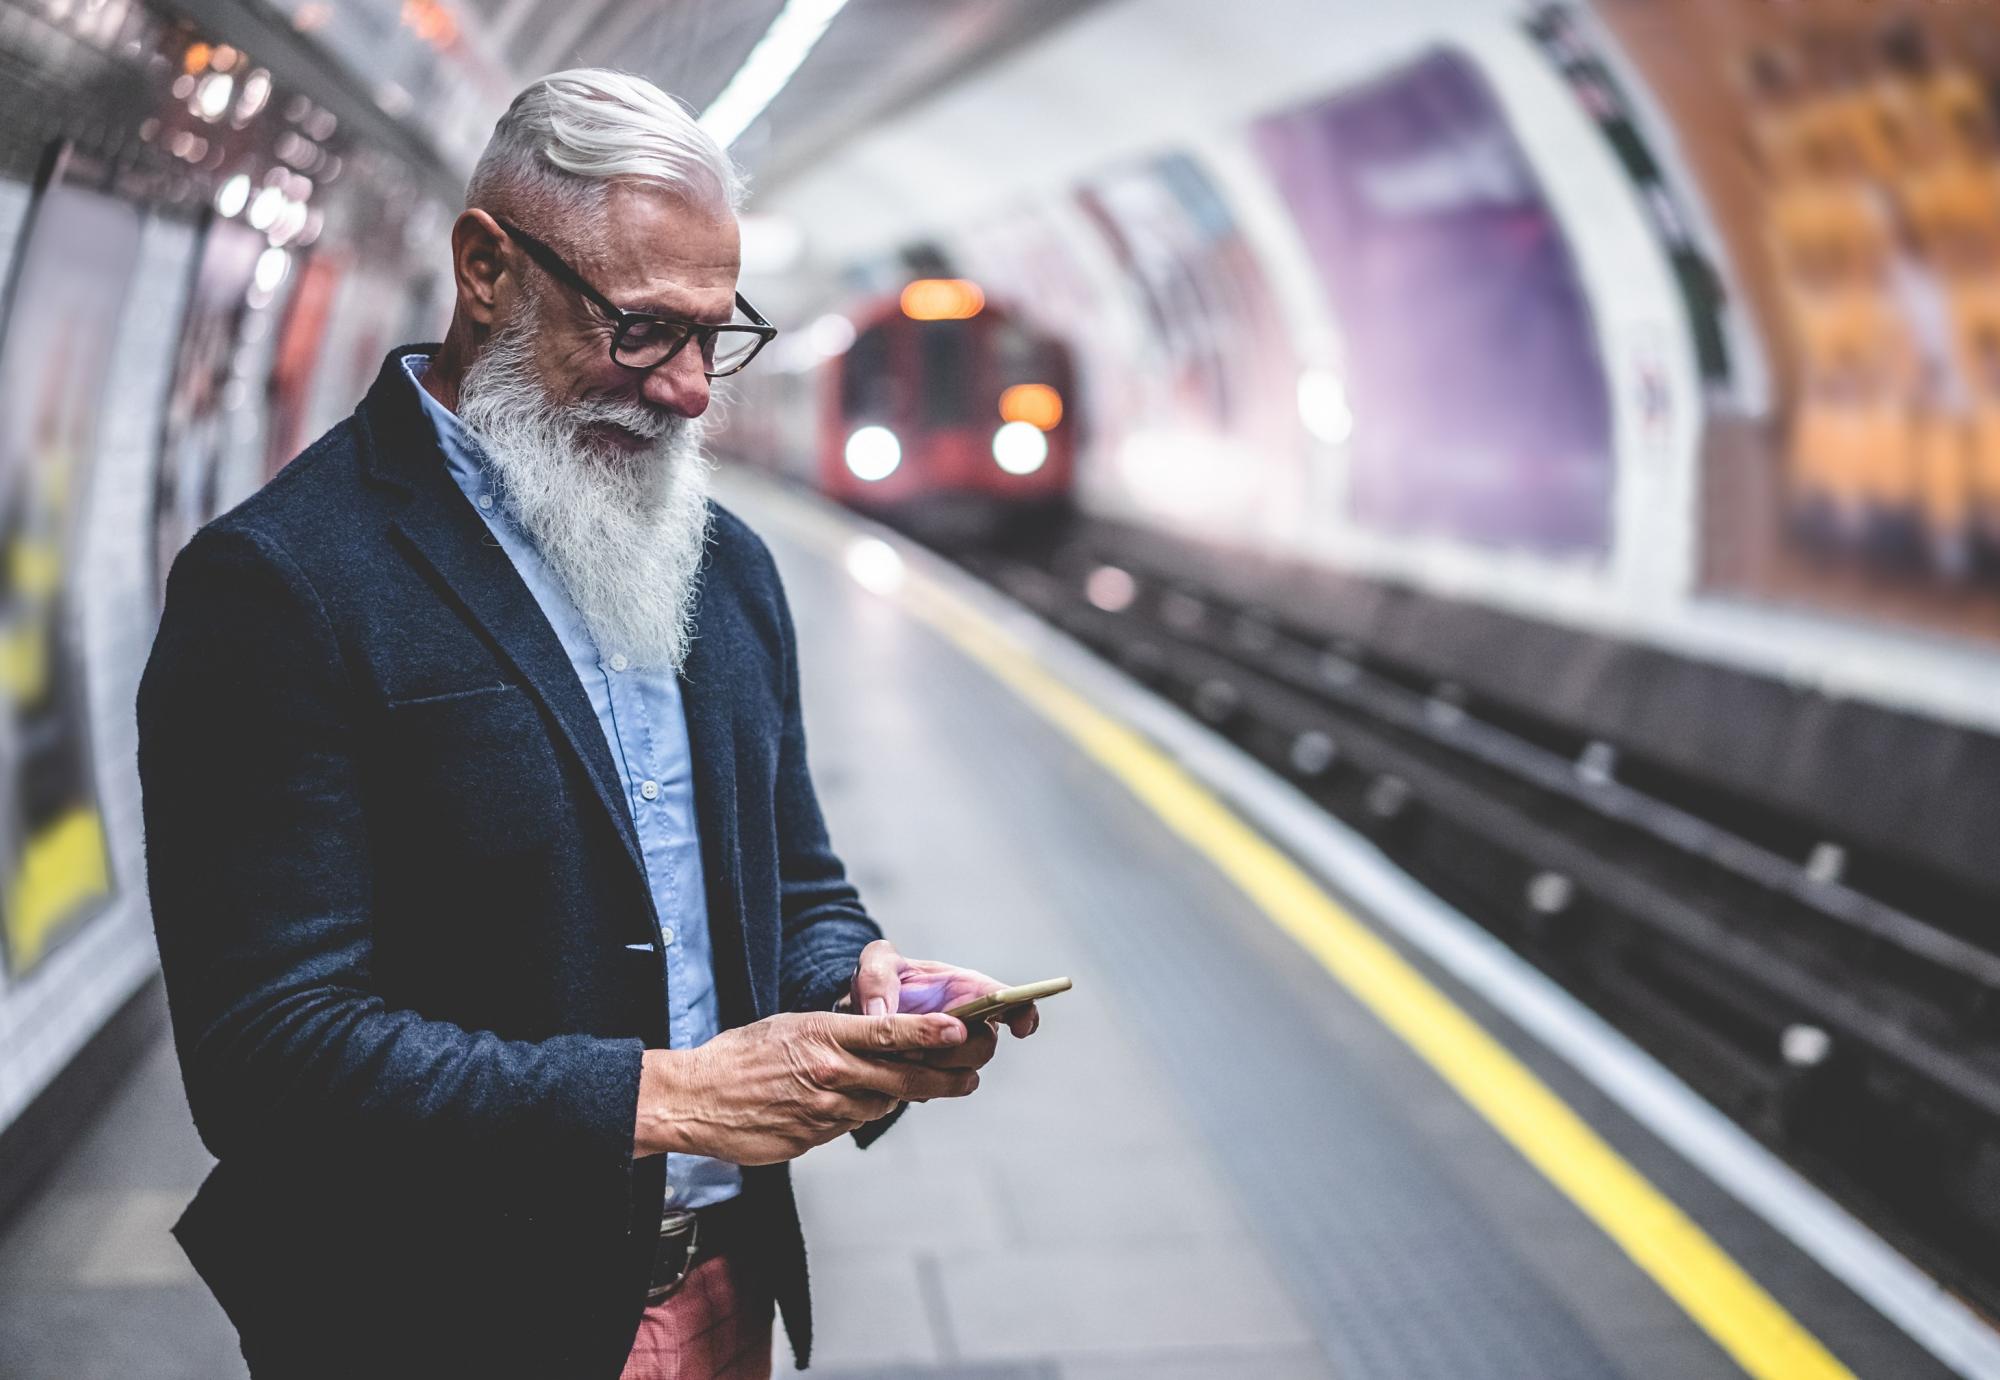 Male rail passenger at a station using a smartphone